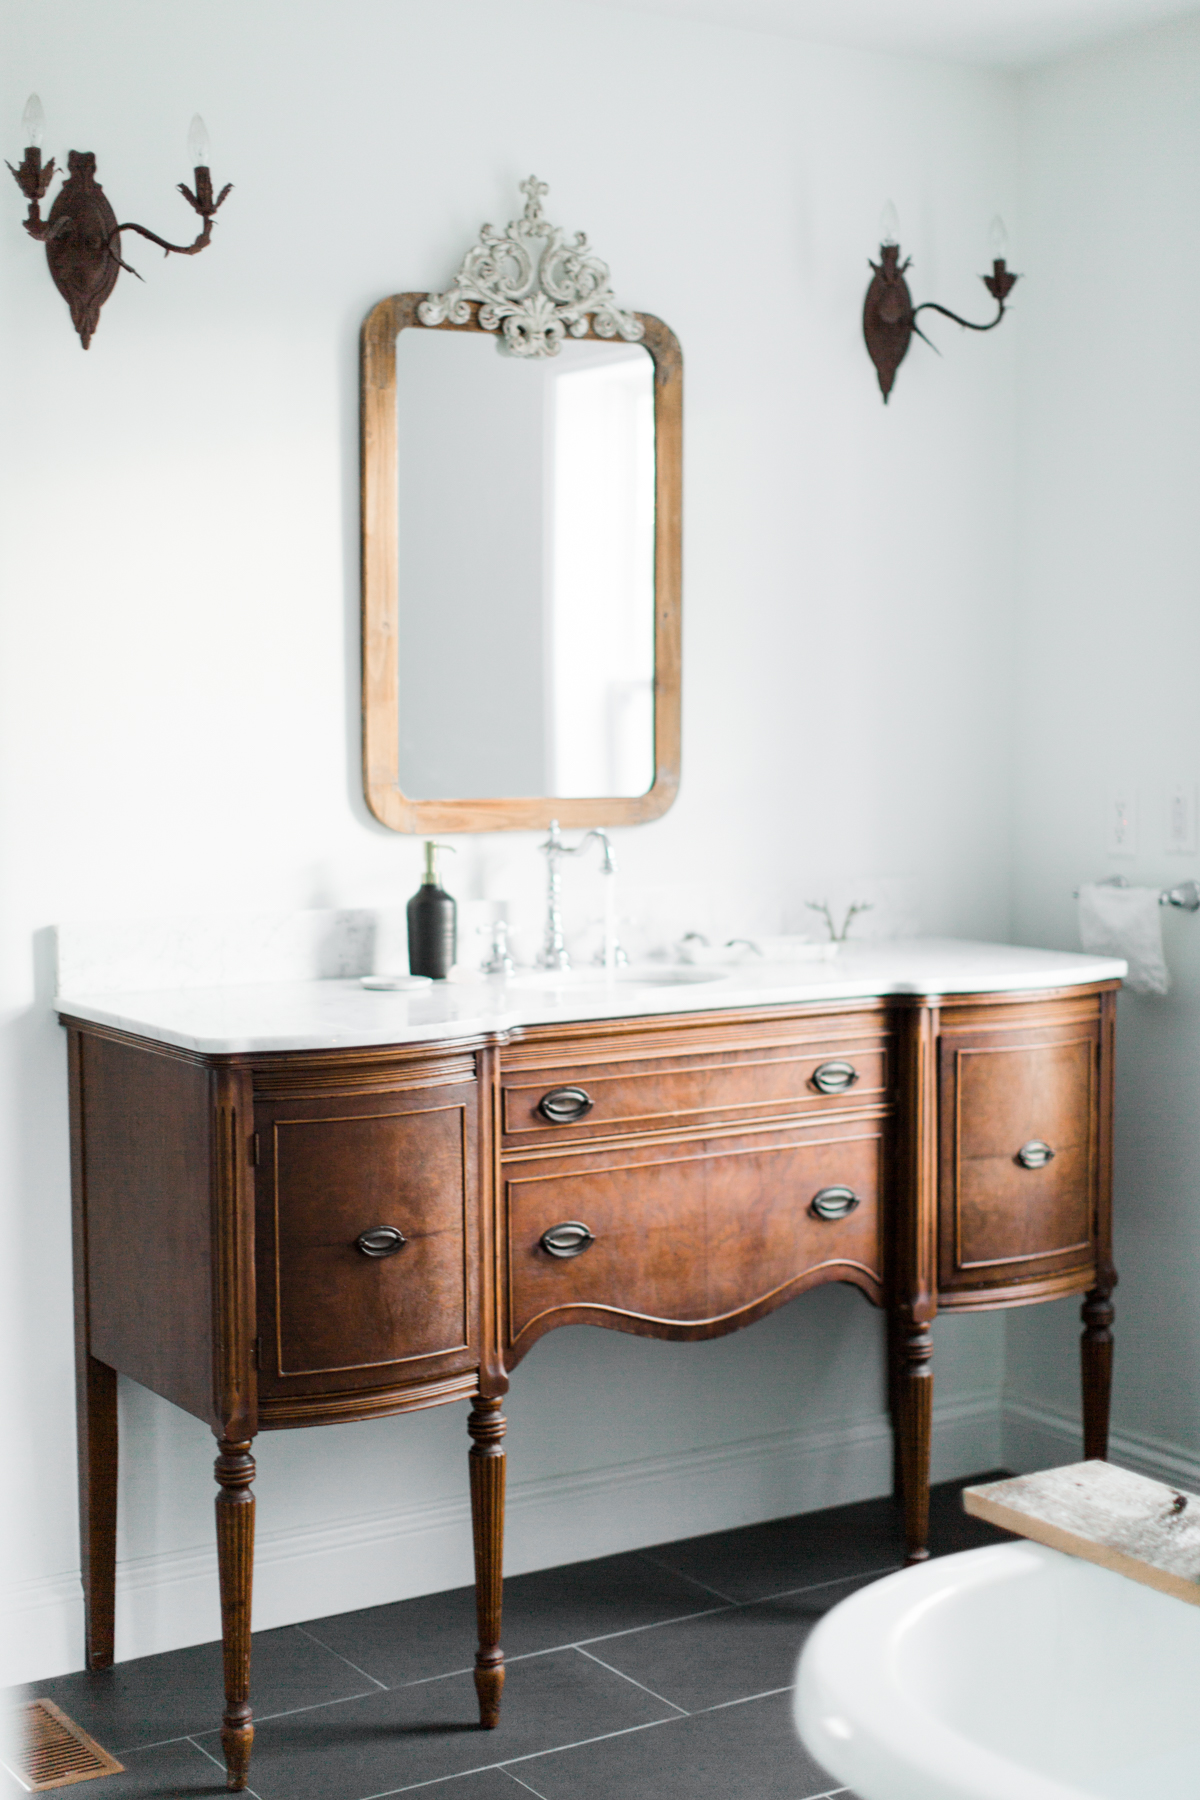 INSPIRED BY THIS - PURPOSEFUL BALANCED BRIGHT RELAXED - HOUZZ